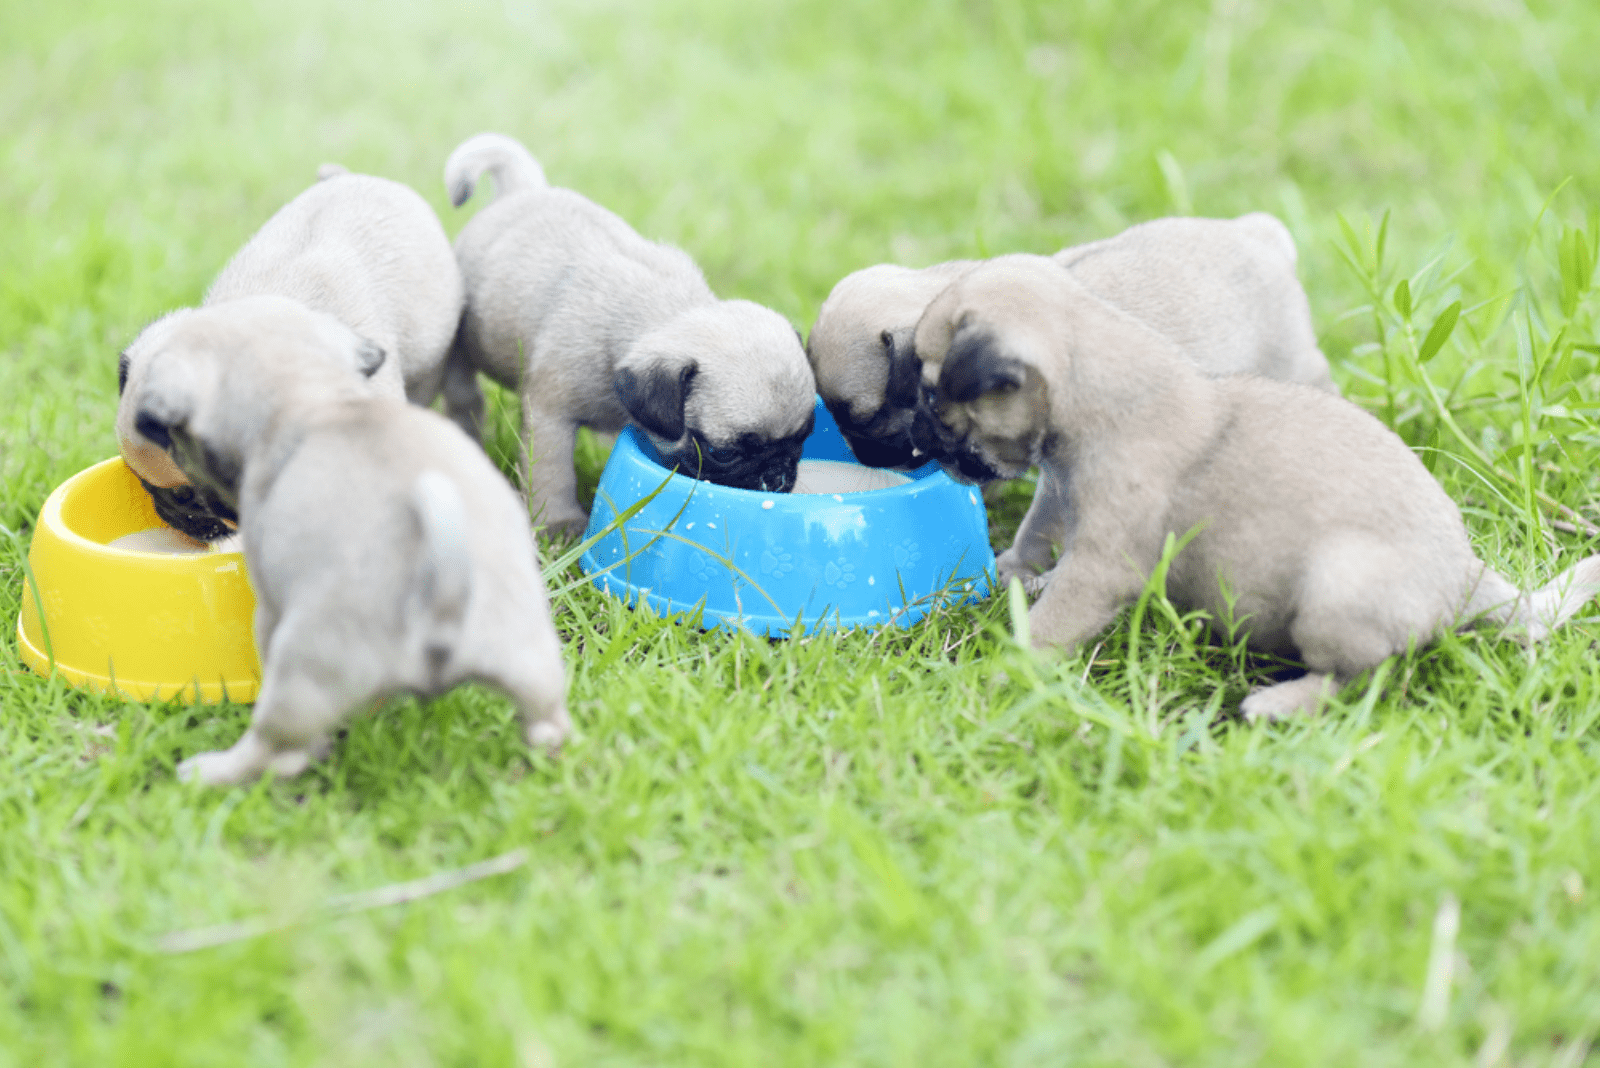 pug puppies eat food from bowls in the meadow